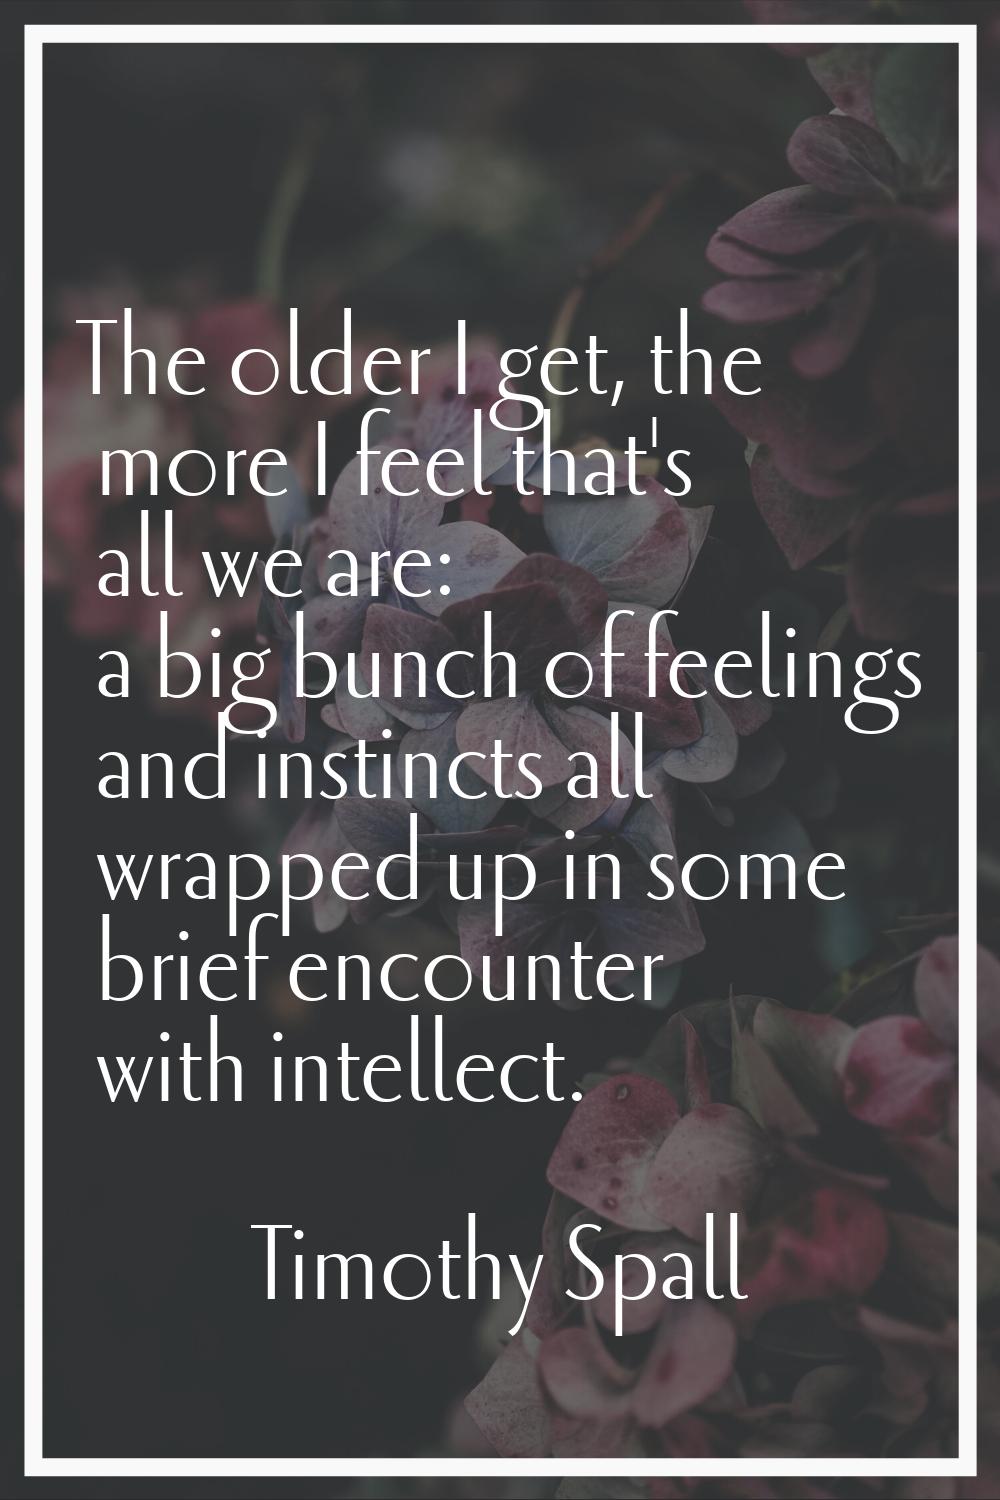 The older I get, the more I feel that's all we are: a big bunch of feelings and instincts all wrapp